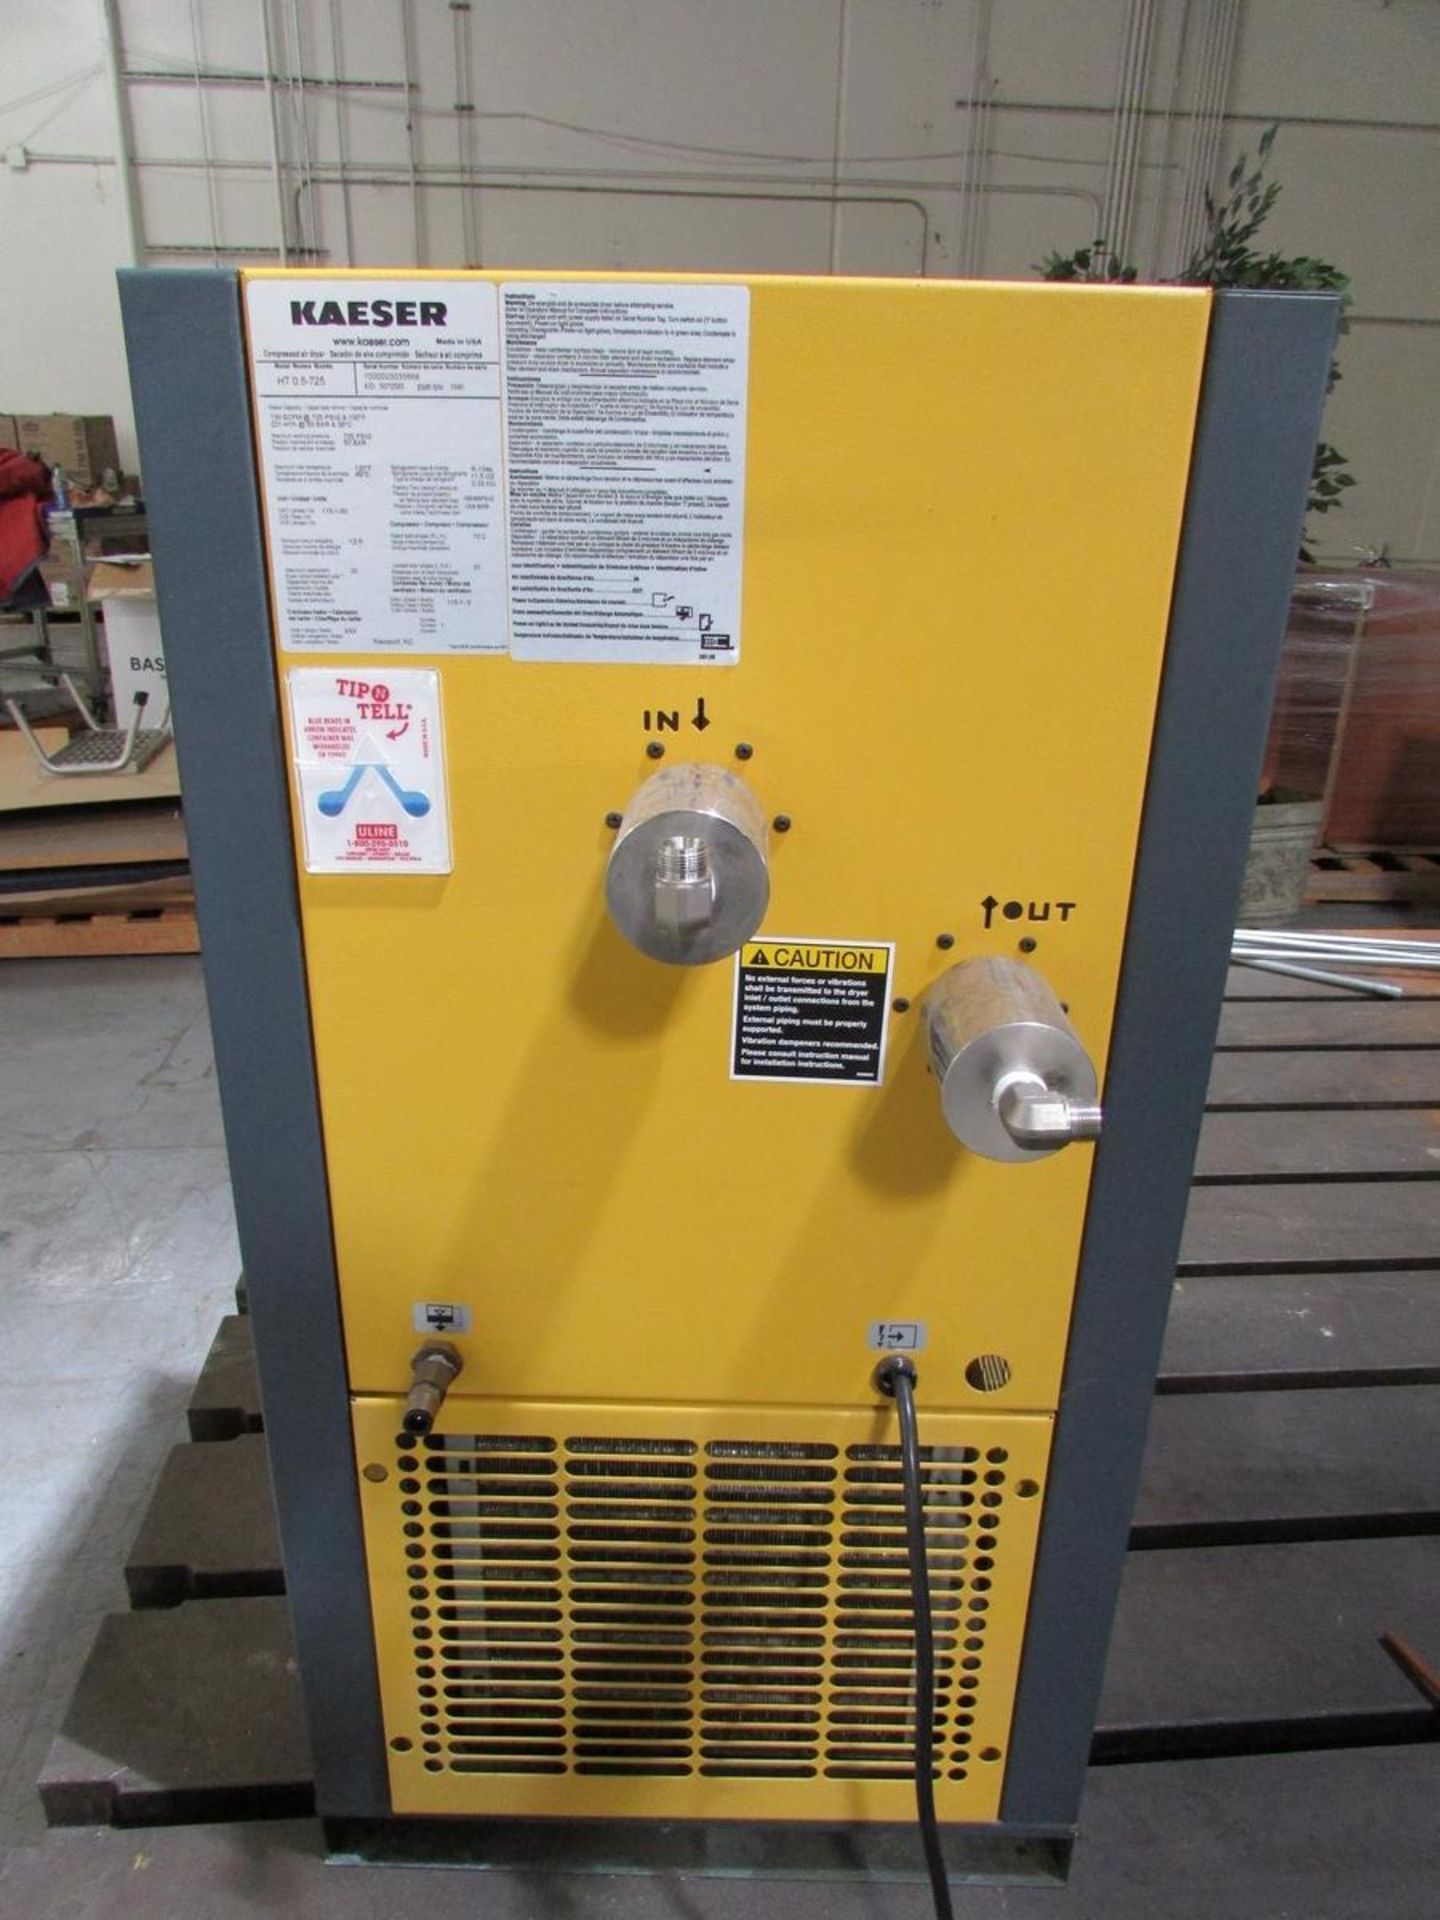 Kaeser aHT0.5-725 Refrigerated Compressed Air Dryer - Image 11 of 18